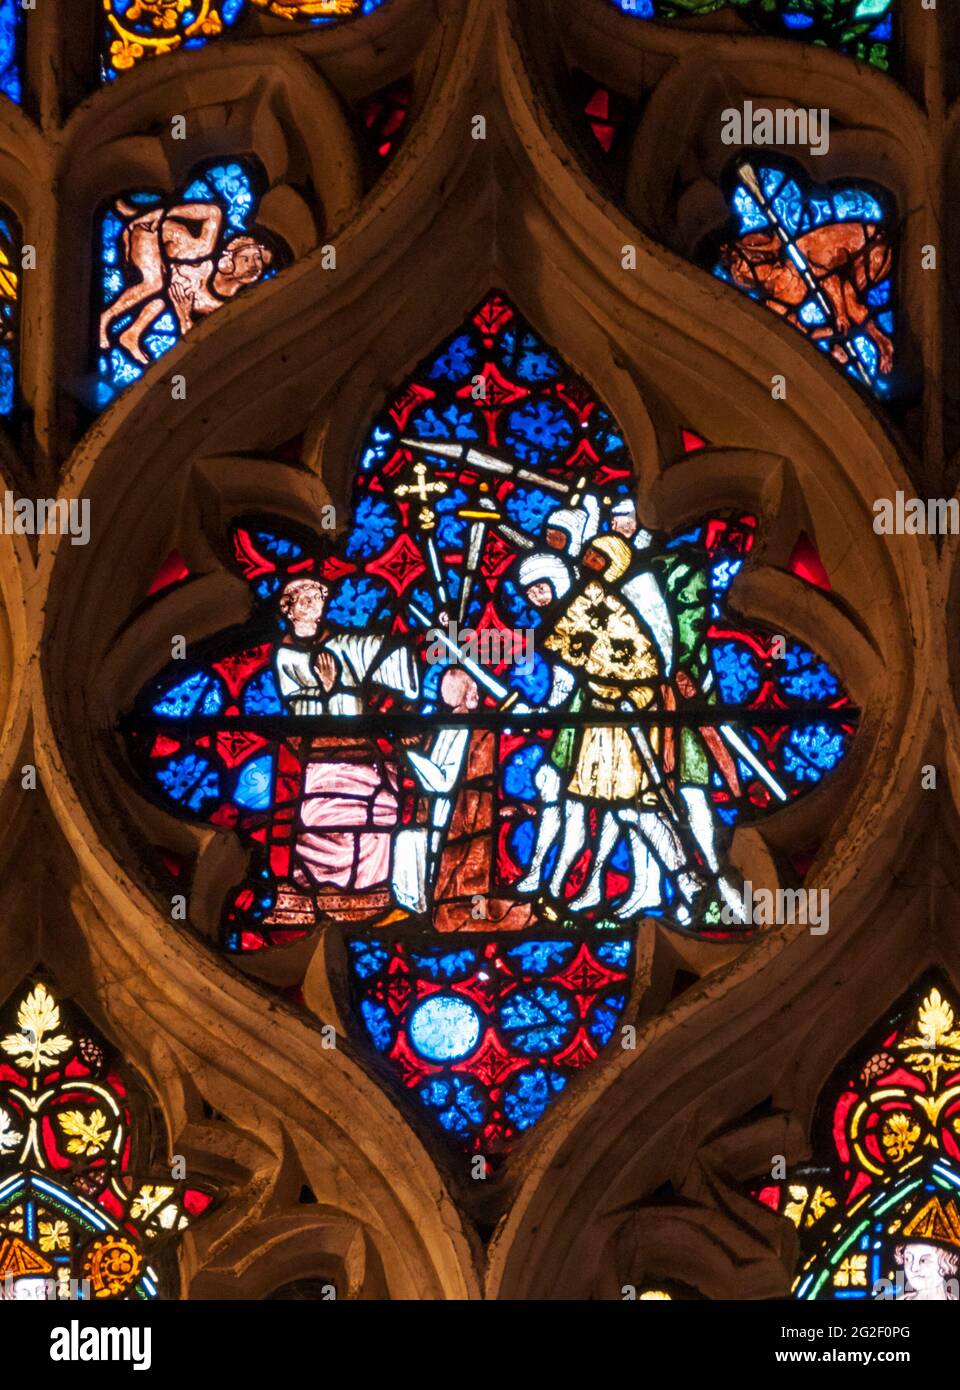 Detail of 1320 Becket stained glass window in Christ Church Cathedral, Oxford. Shows death of Becket - facial features removed by order of Henry VIII. Stock Photo